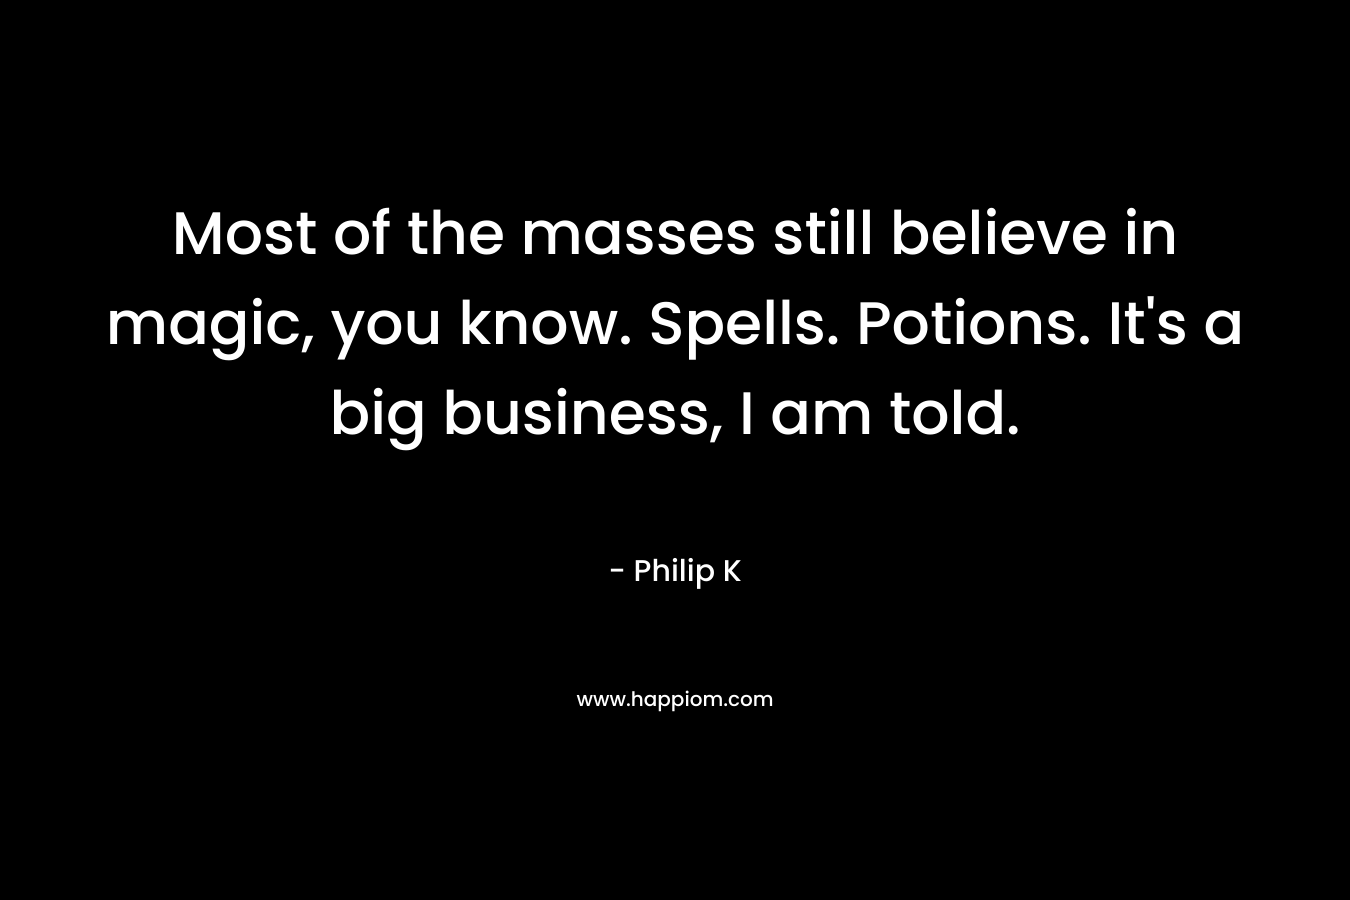 Most of the masses still believe in magic, you know. Spells. Potions. It’s a big business, I am told. – Philip K